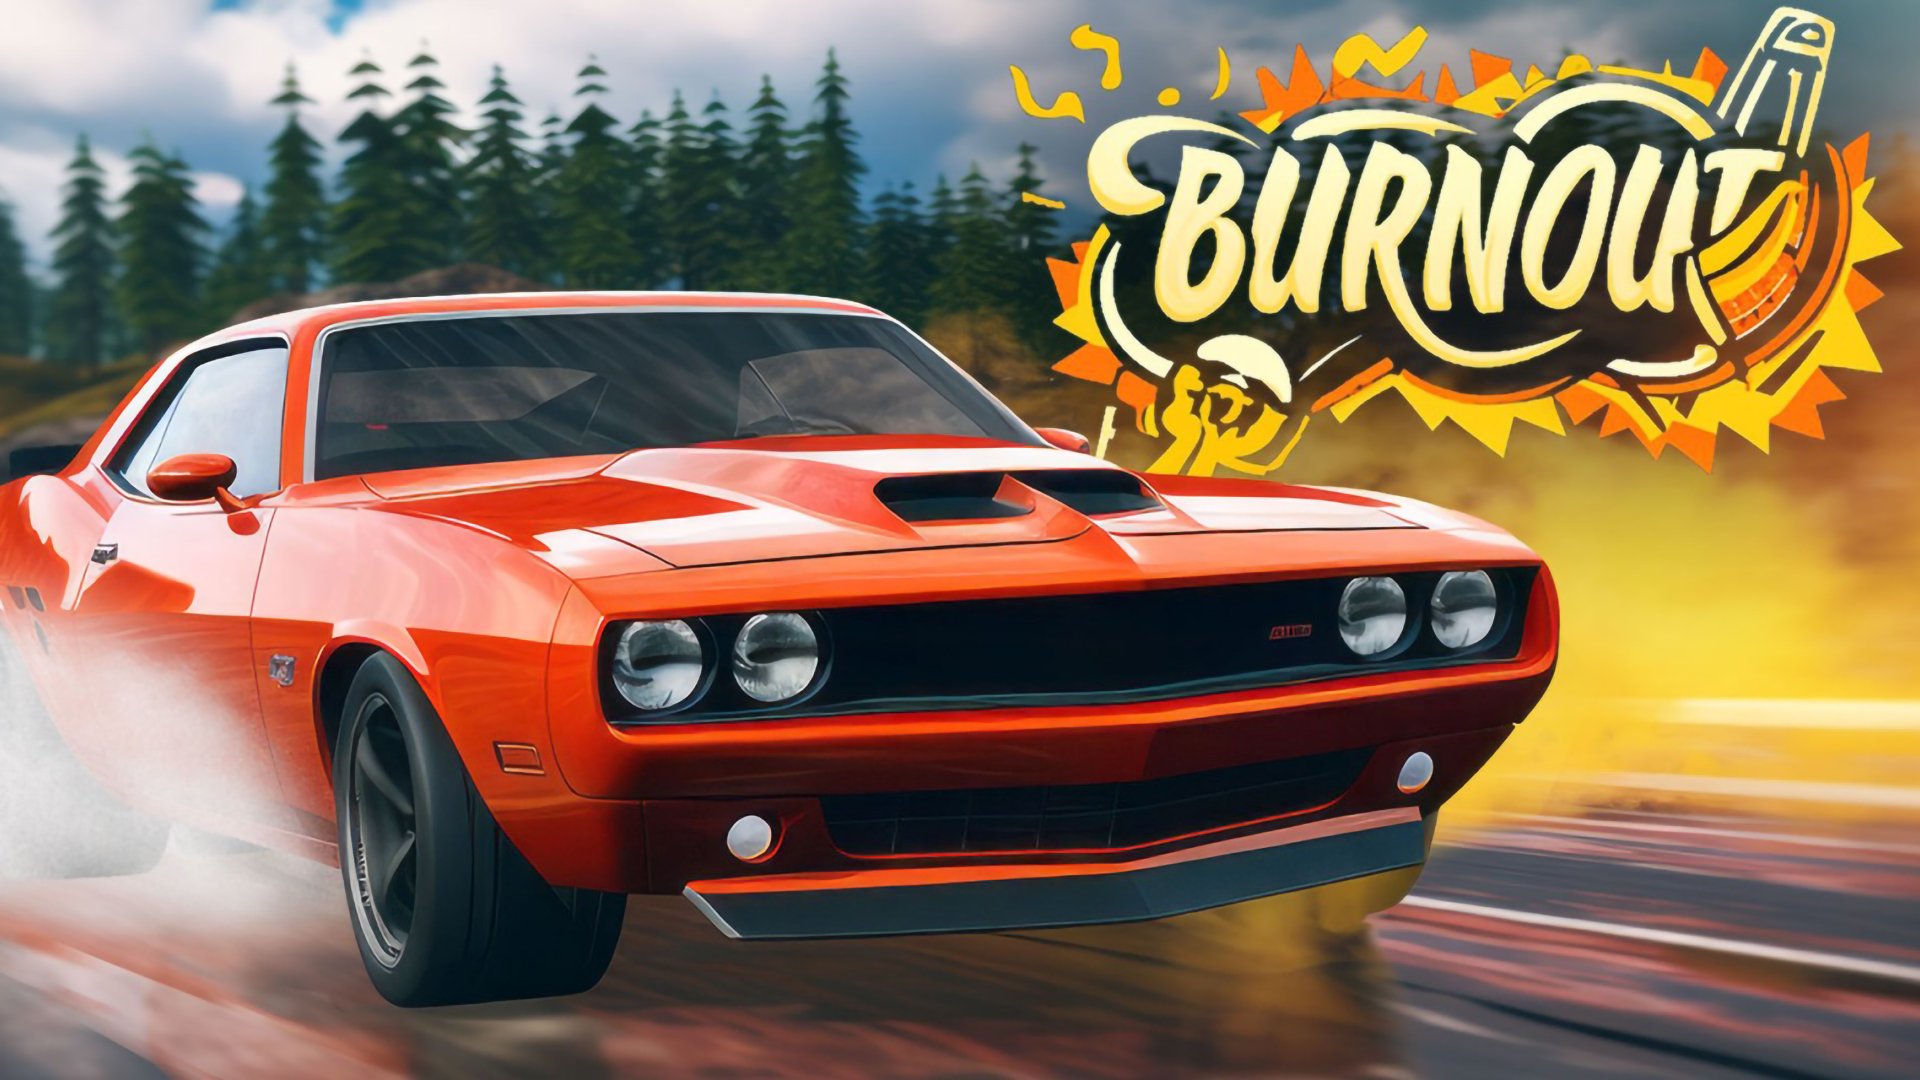 New 'Burnout' game on Switch eShop has nothing to do with EA's series | VGC